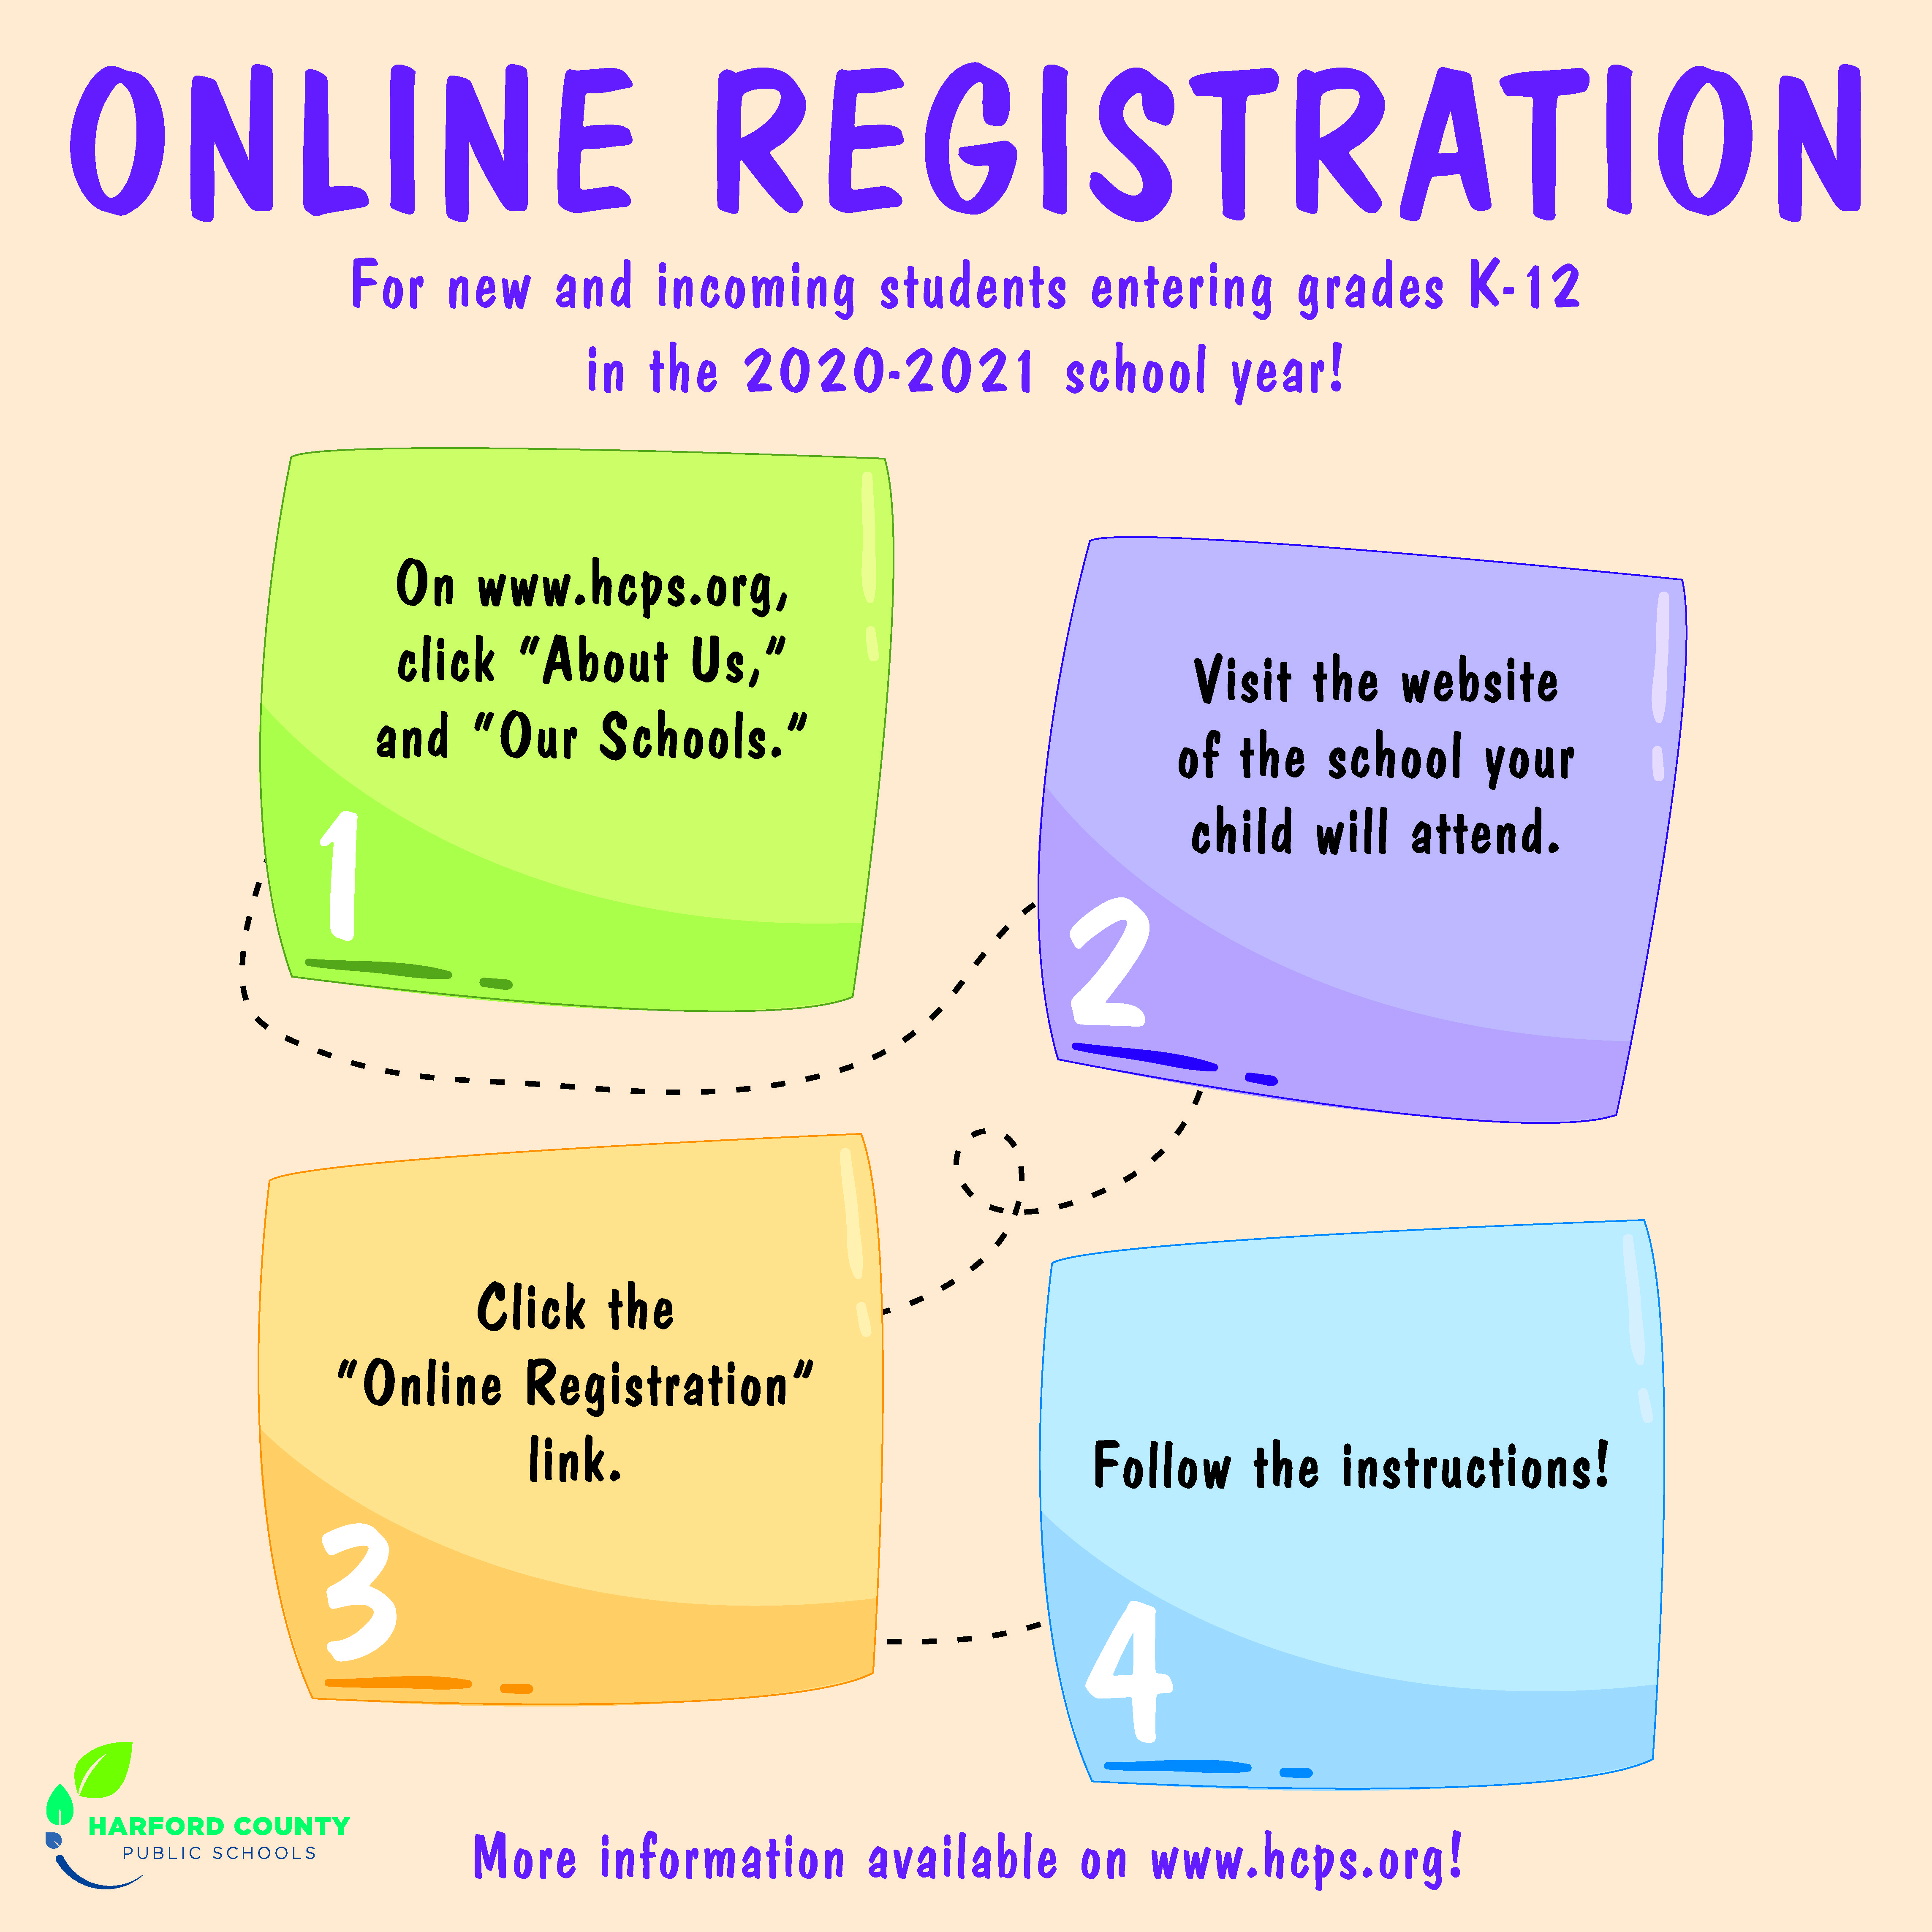 Online Registration. For new and incoming students entering grades K-12 in the 2020-2021 school year! 1. On www.hcps.org click About Us and Our Schools.  2. Visit the website of the school your child will attend.  3. Click the Online Registration link.  4. Follow the instructions.